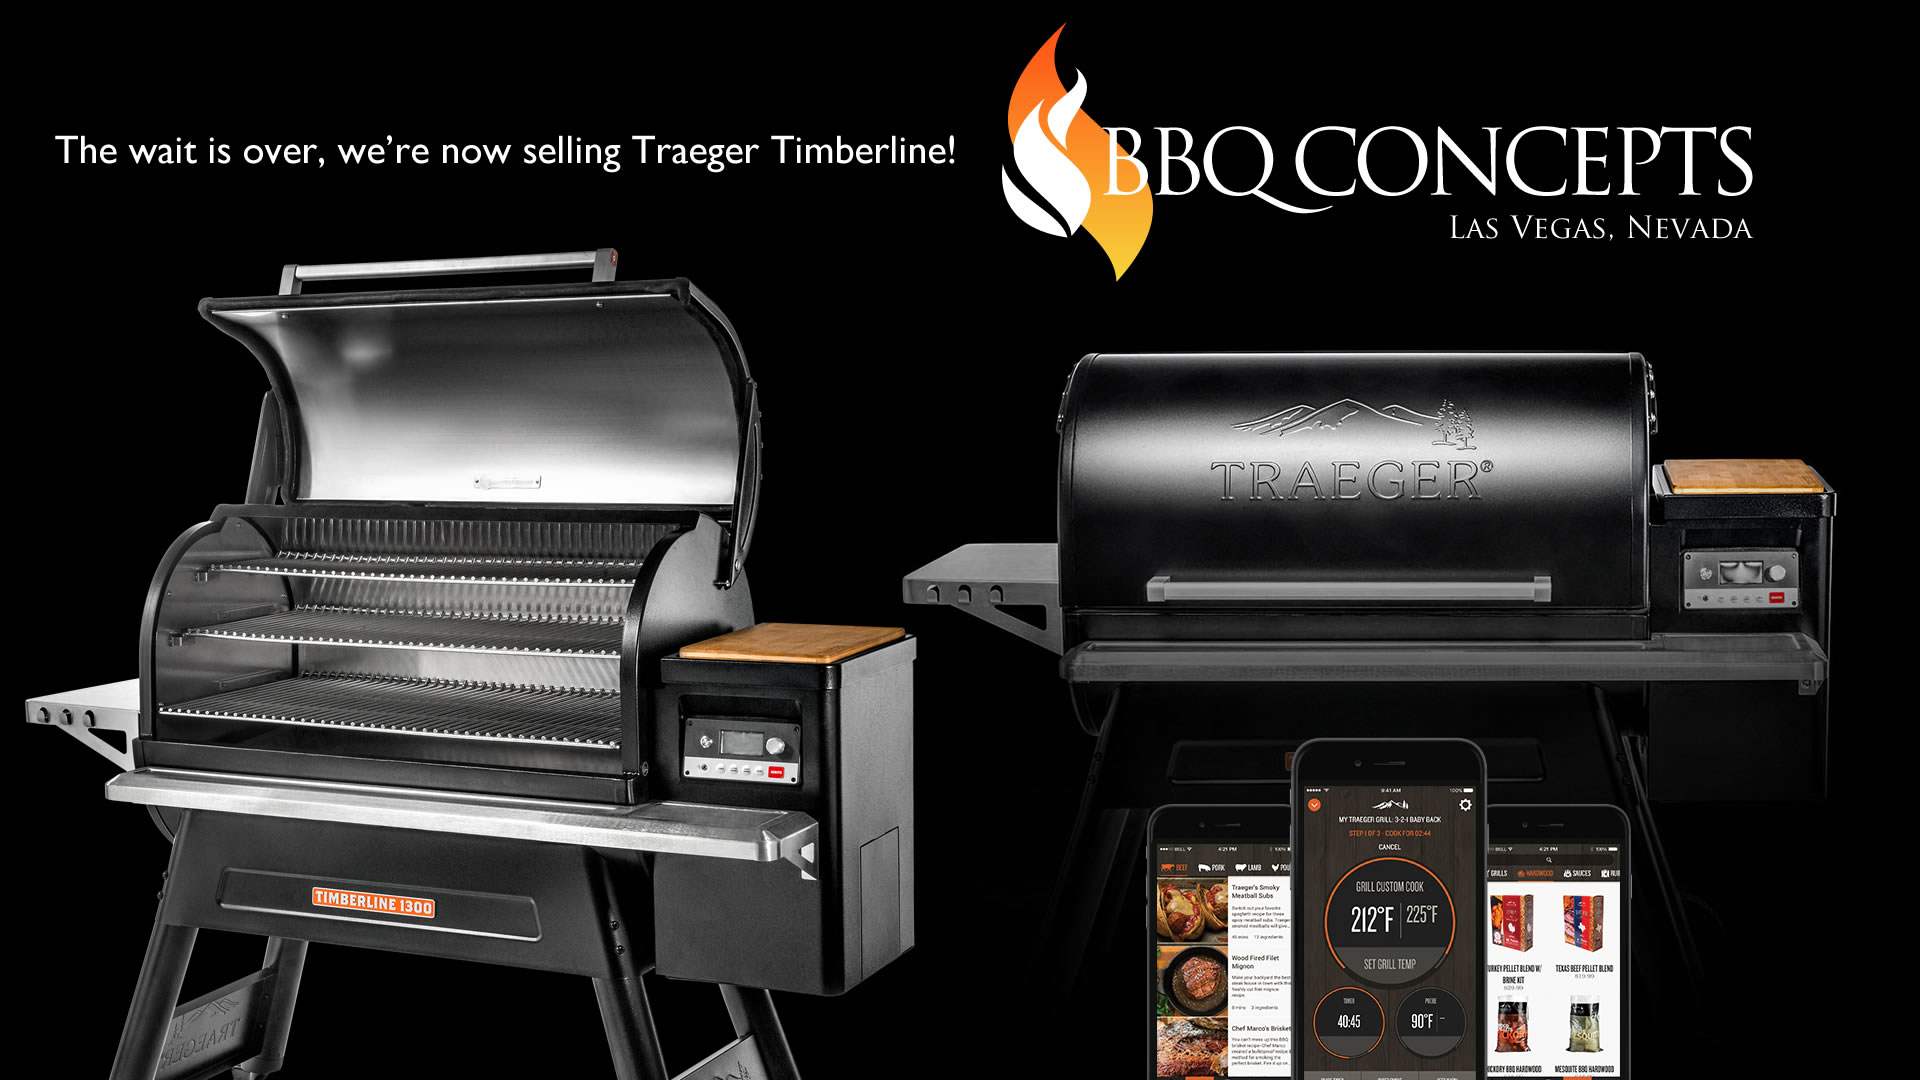 Traeger Timberline Wood Pellet Grill Promotional Advertisement - BBQ Concepts Las Vegas, Nevada